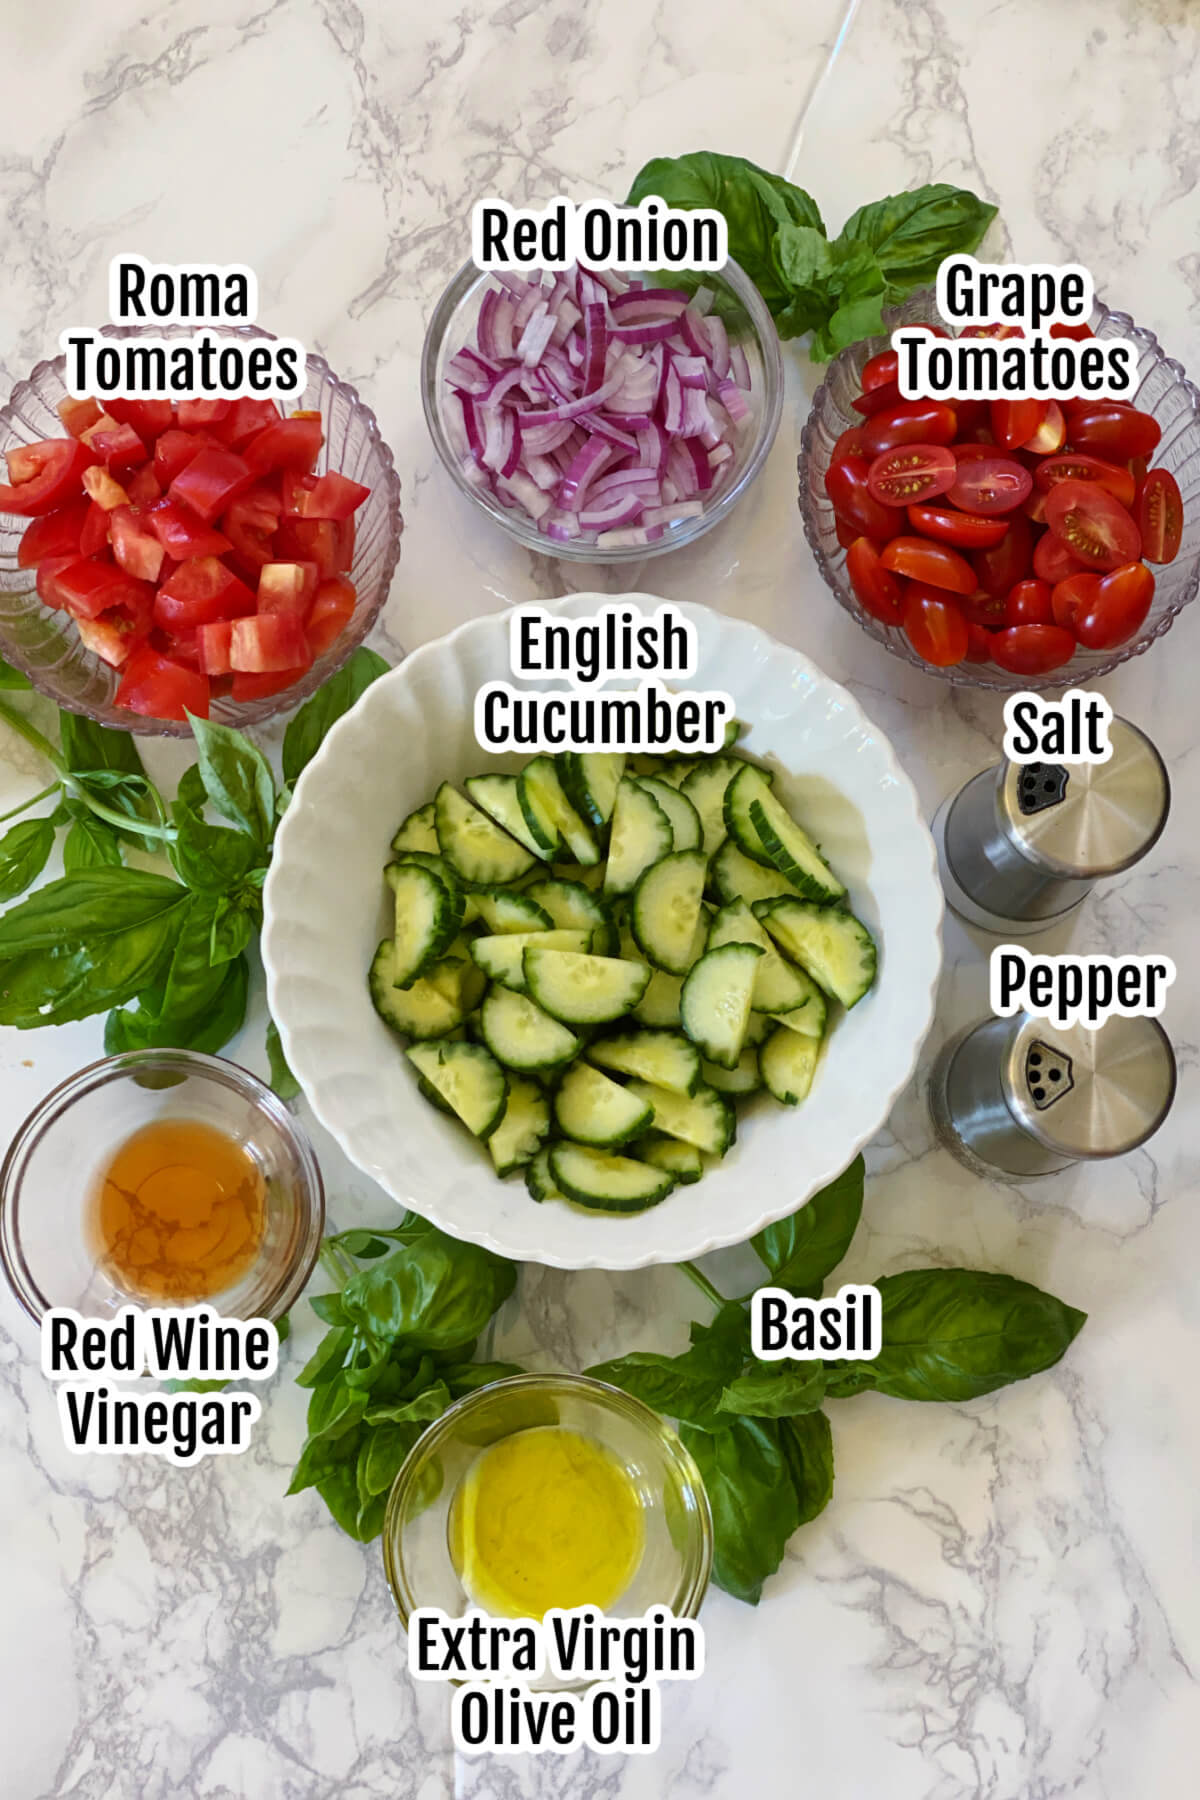 Image of ingredients needed to make the Basil Tomato Salad recipe. 